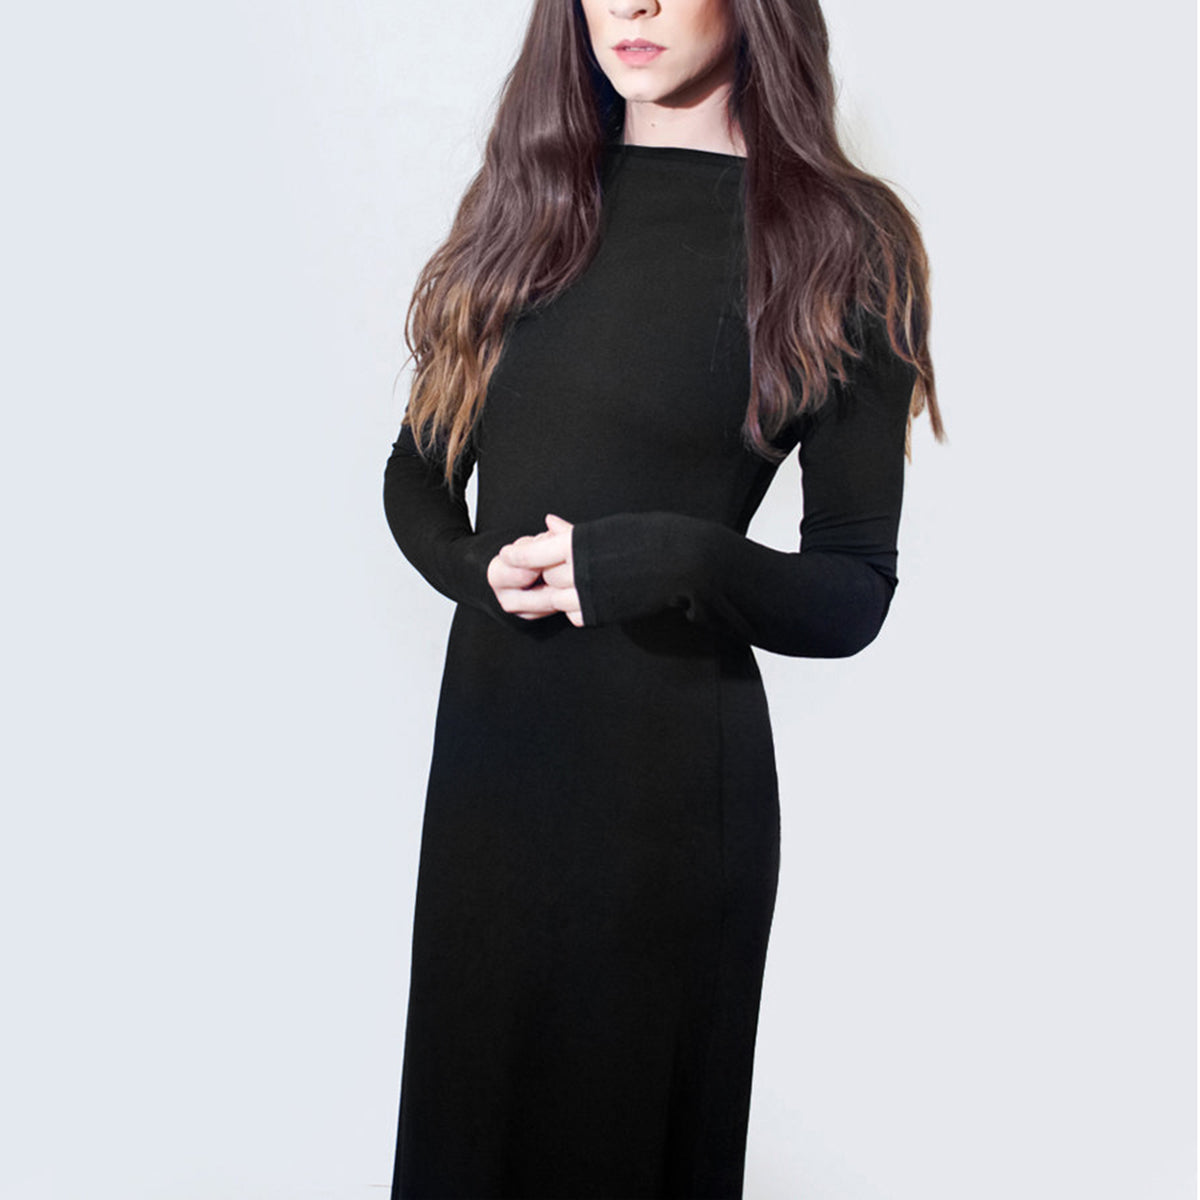 Boatneck Maxi Dress with Long Sleeves